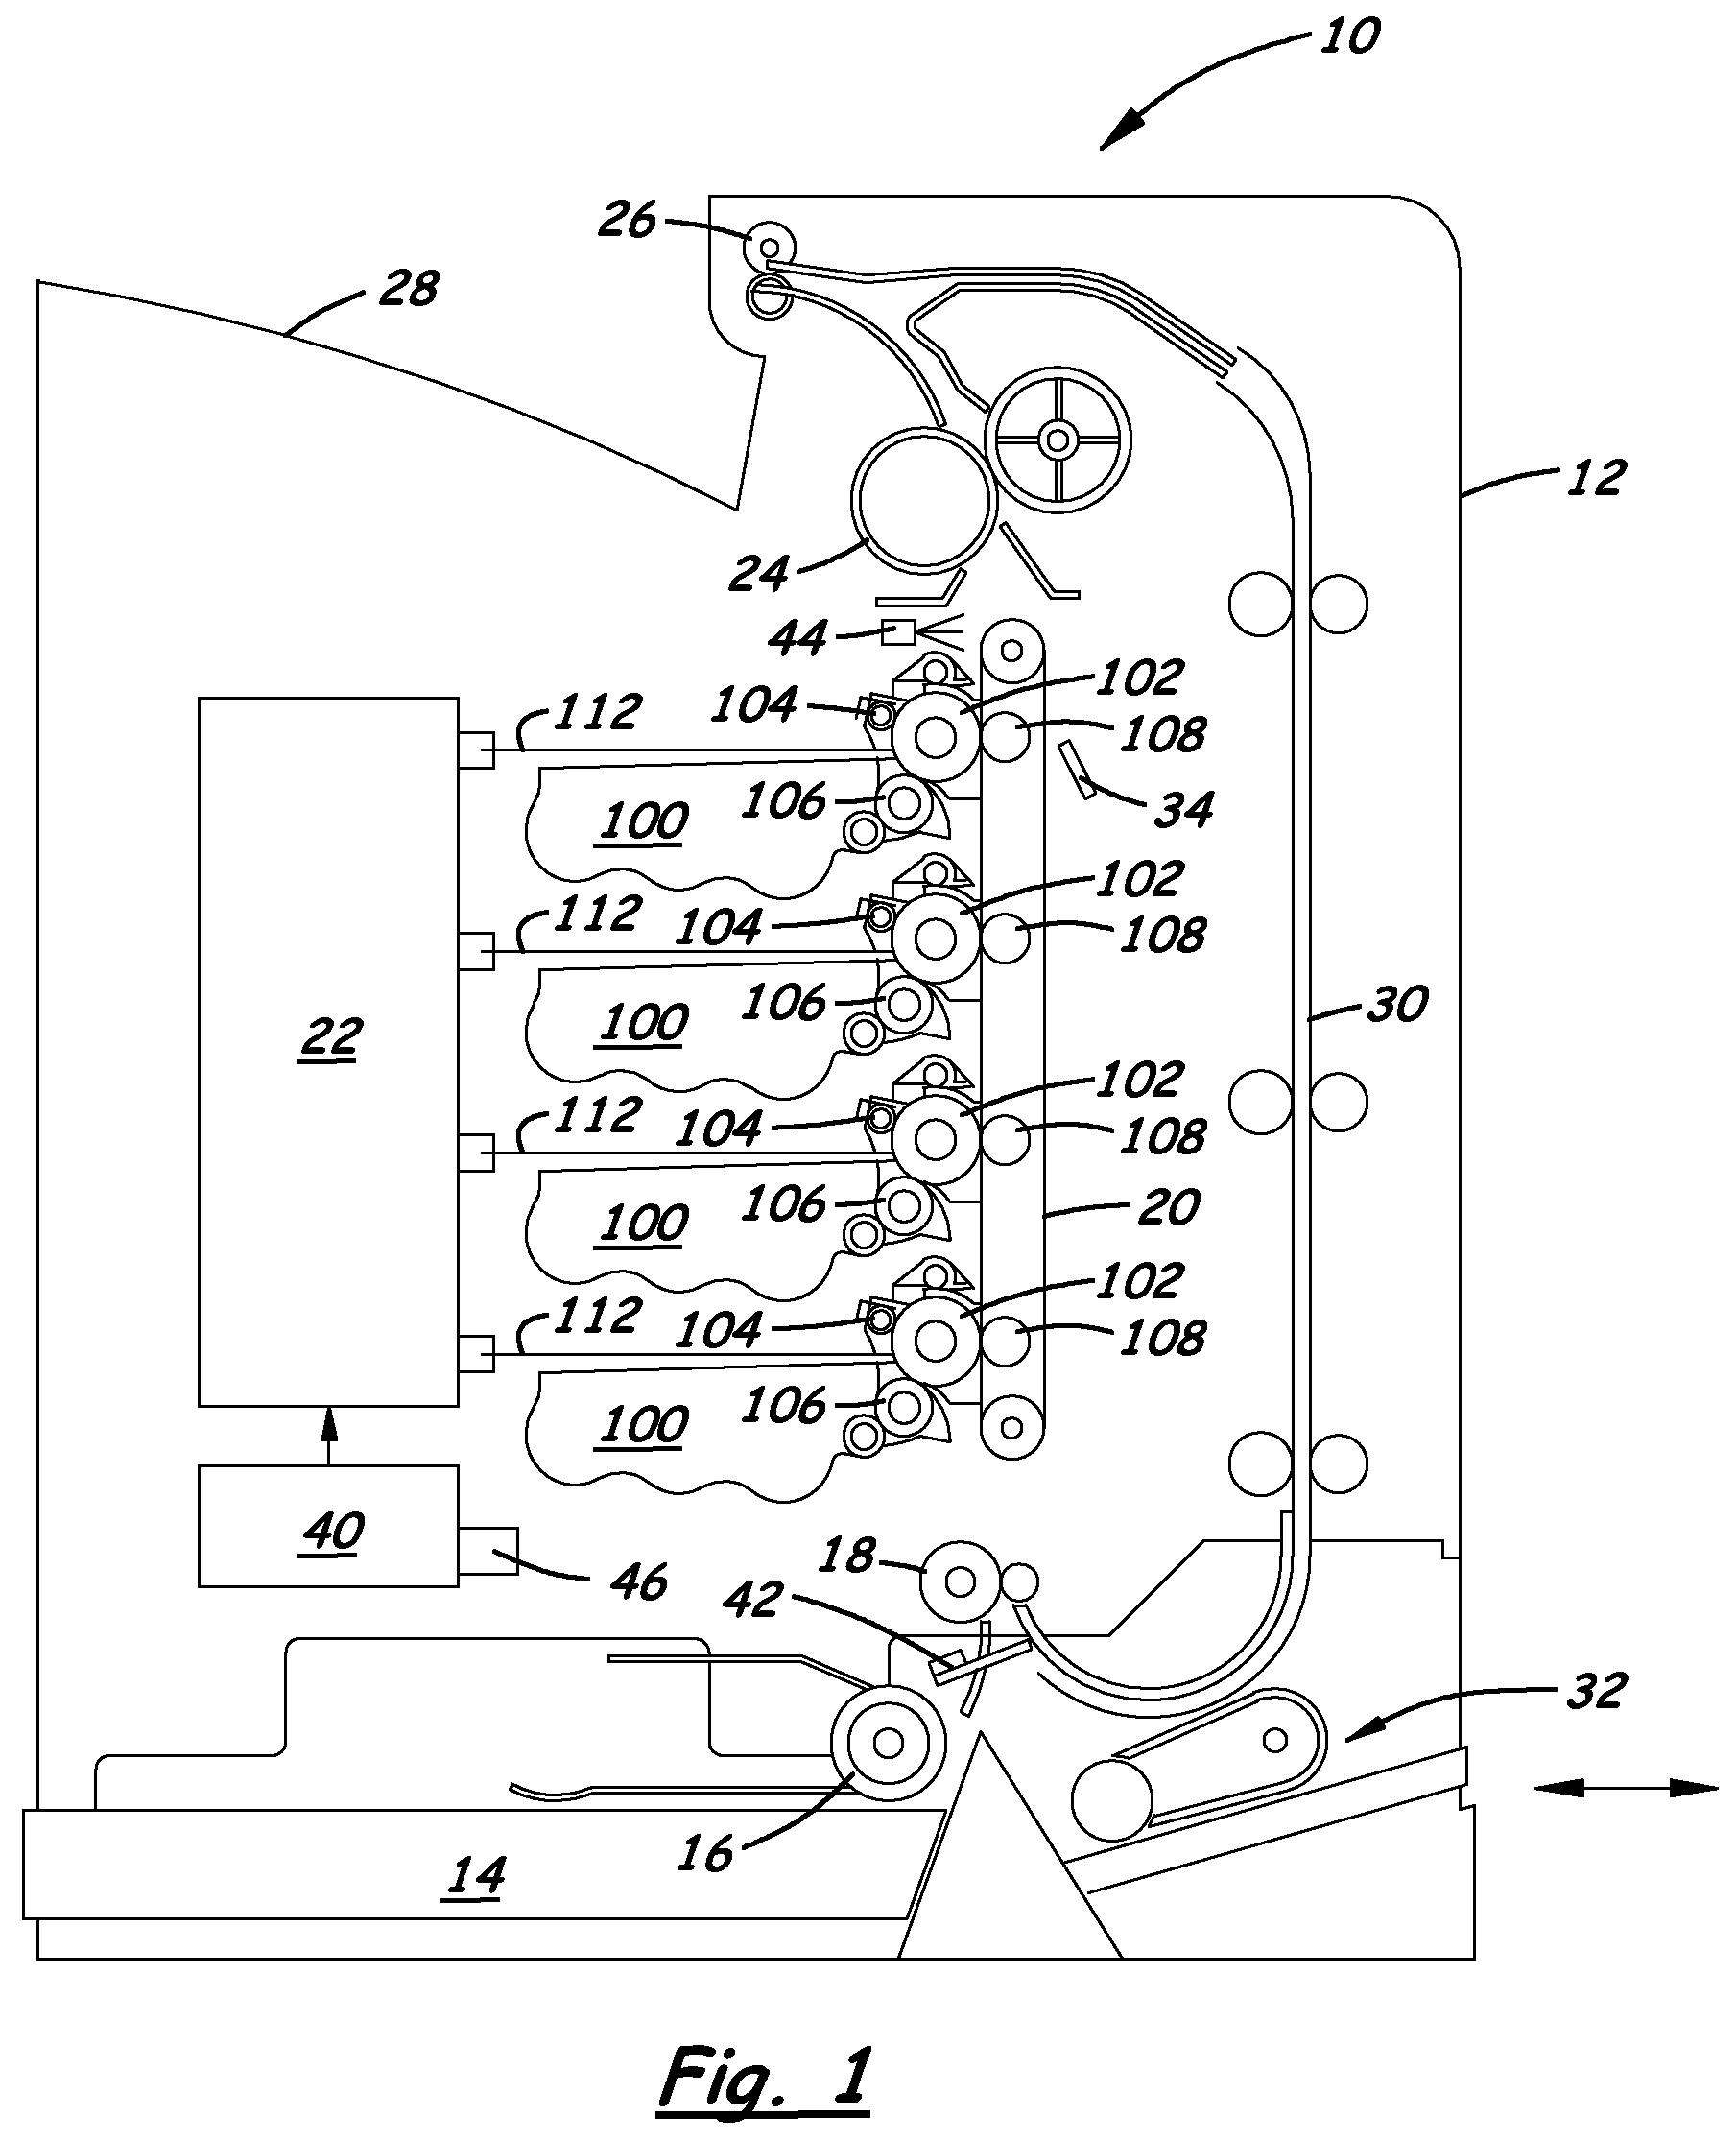 System and Method for Adjusting Selected Operating Parameter of Image Forming Device Based on Selected Environmental Conditions to Control White Vector